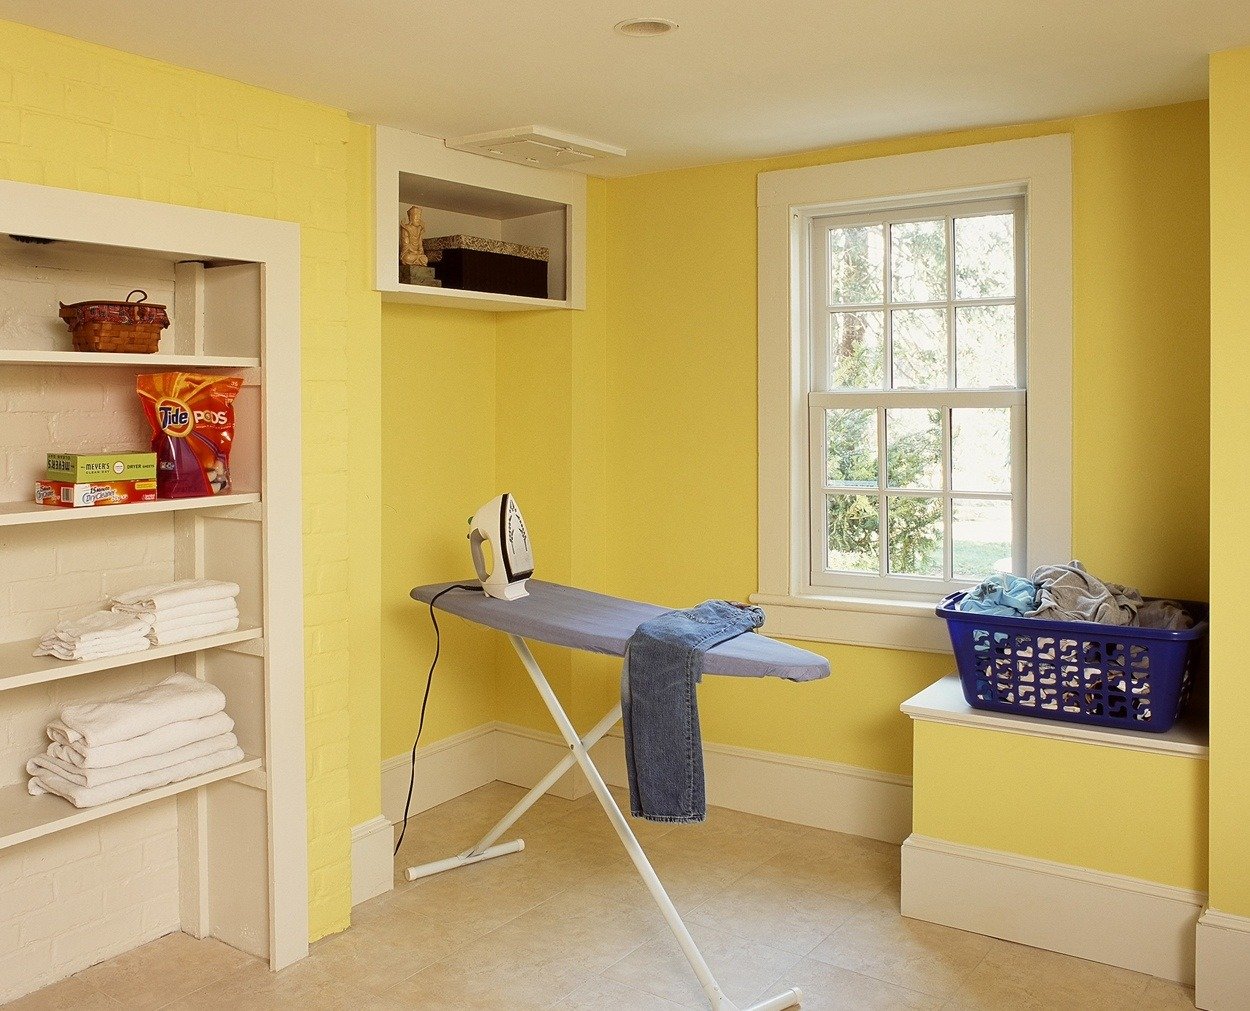 Exercise room or play area are options for this multiuse space in this New Canaan home.